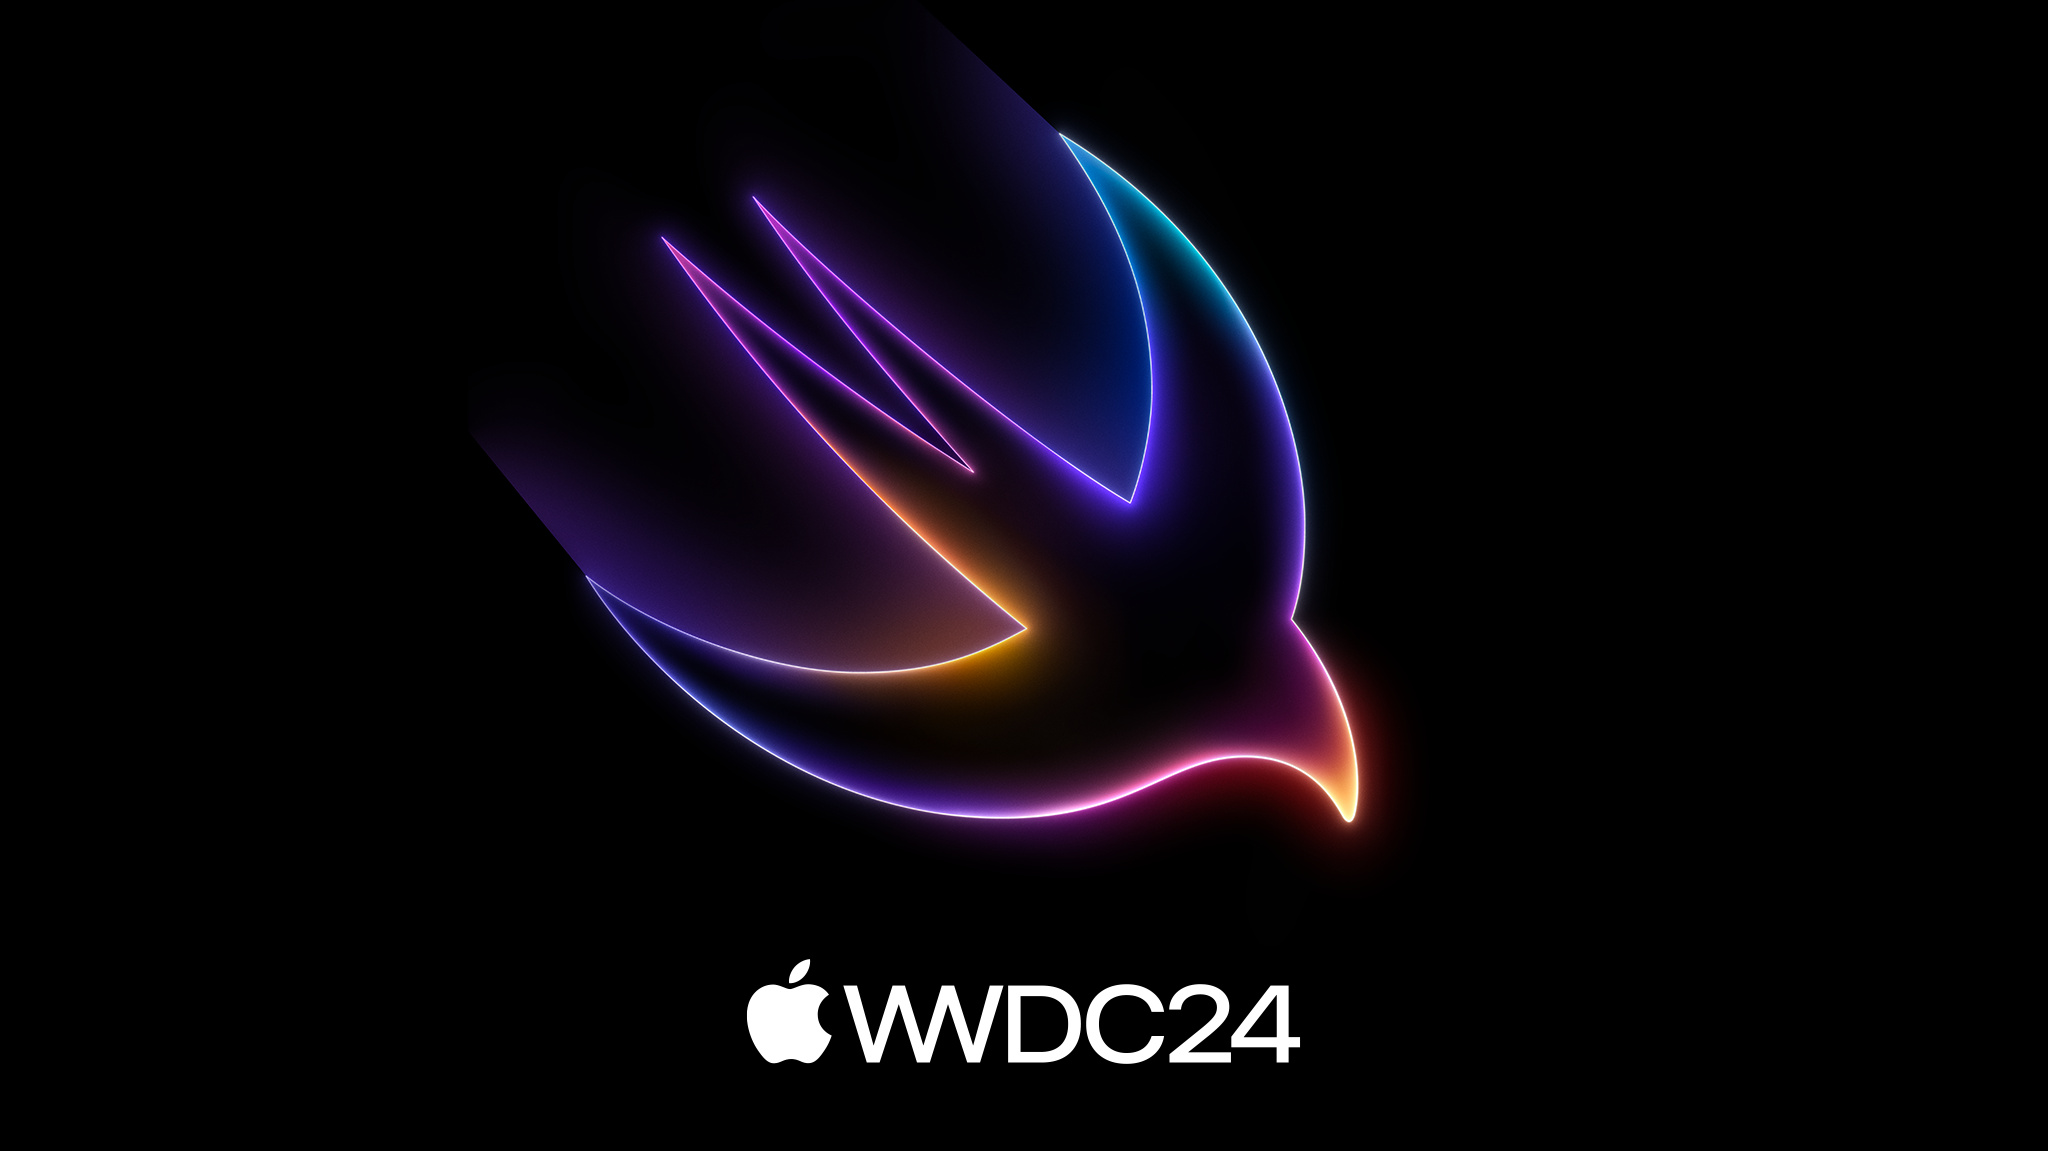 The phrase “WWDC24” is shown in a glowing gradient of red, purple, and blue on a black background.